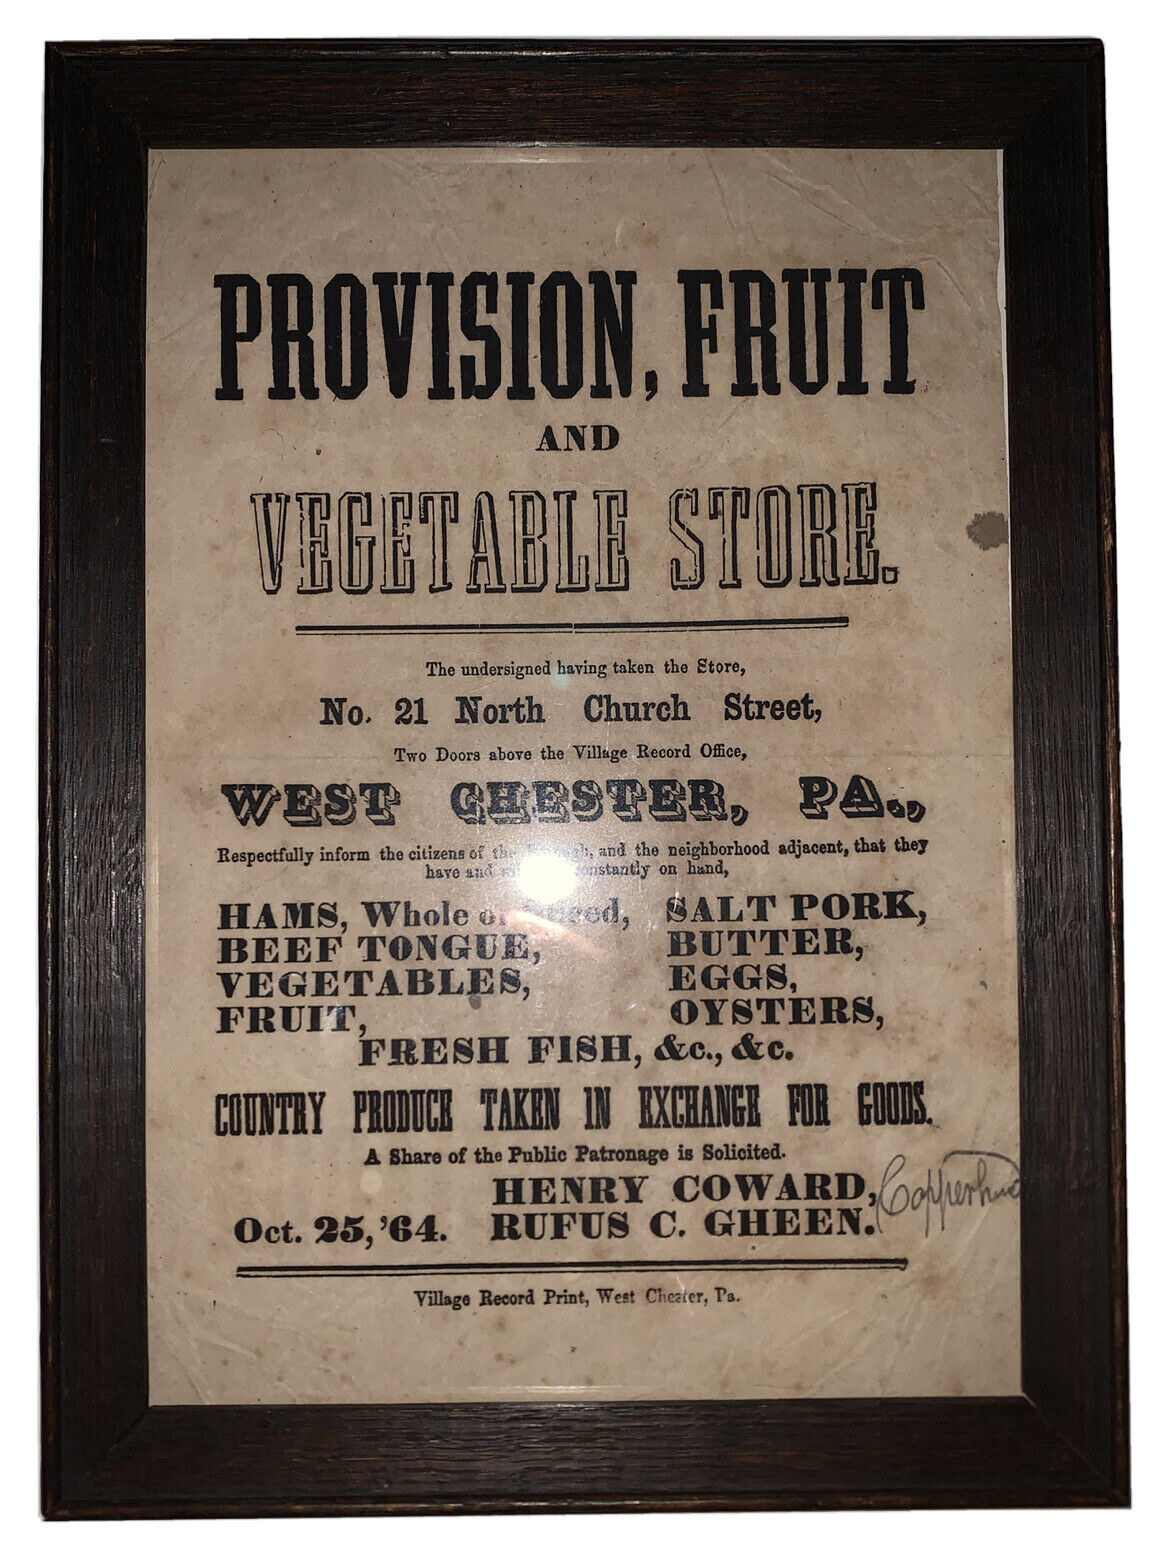 1864, WEST CHESTER, PA, ORIGINAL BROADSIDE, 21 N CHURCH ST, CHESTER COUNTY, PA